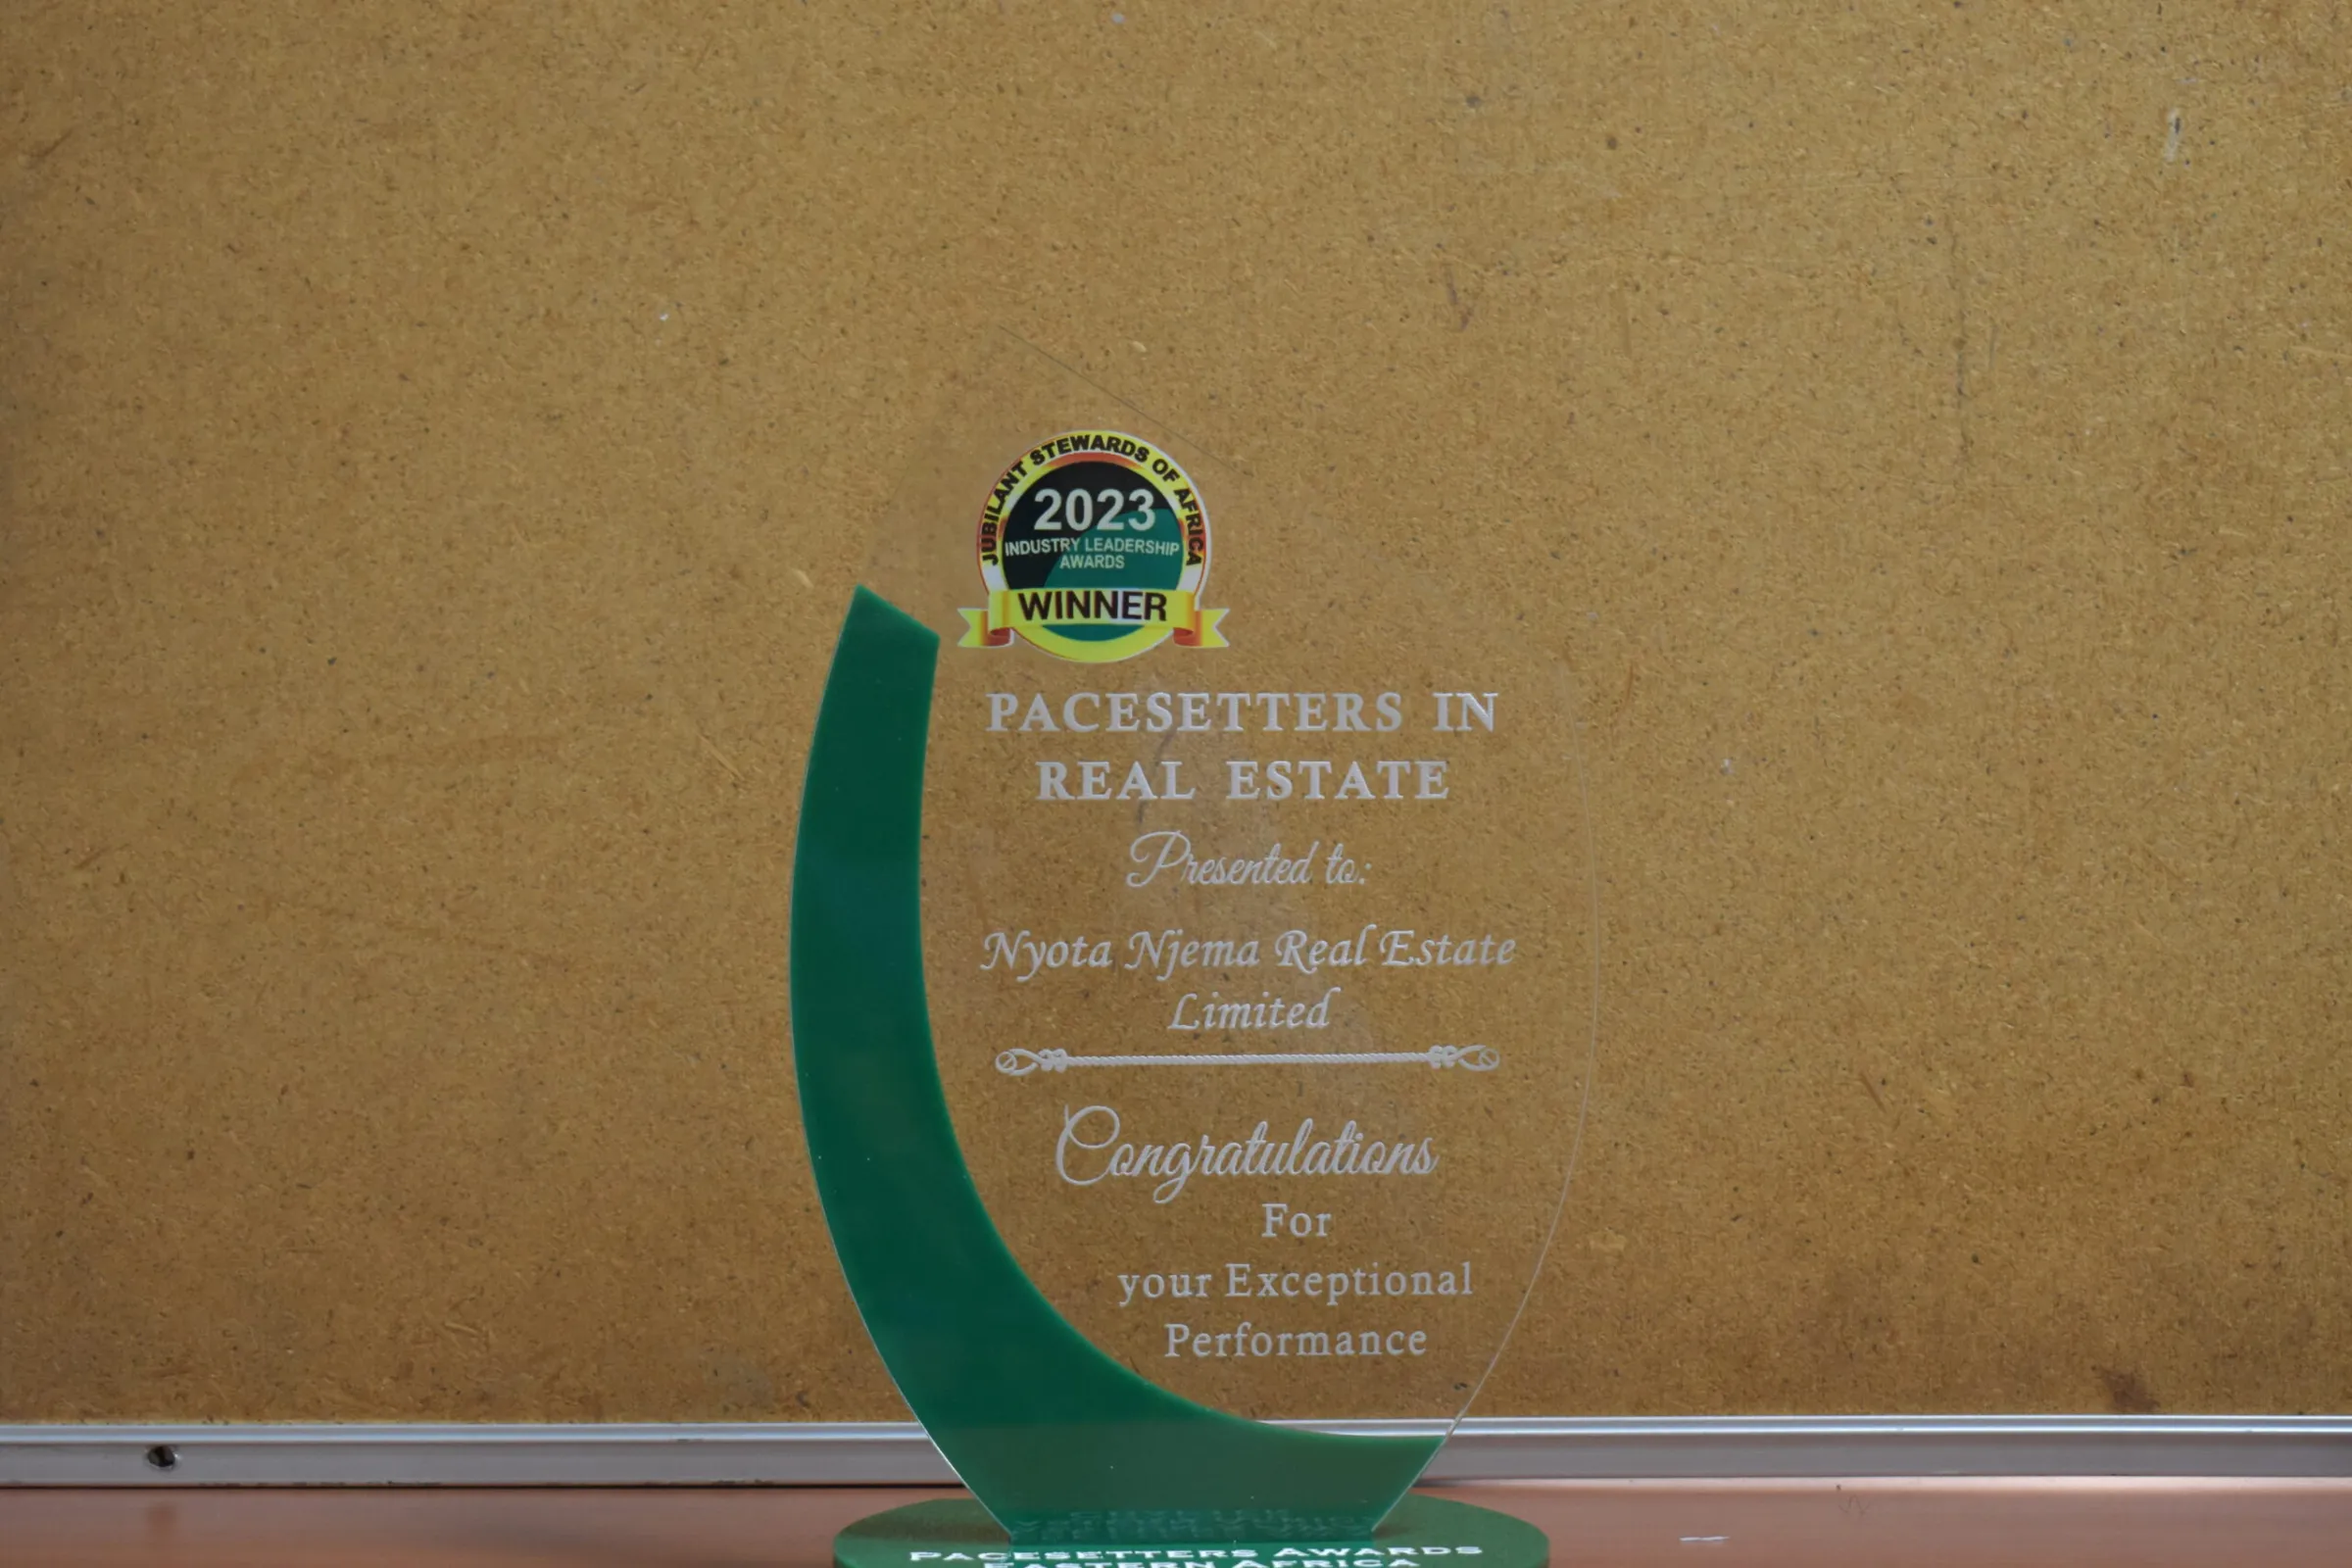 Pacesetters in Real Estate 2023 Awarded by Jubilant Stewards of Africa as “Pacesetters in Real Estate” in 2023